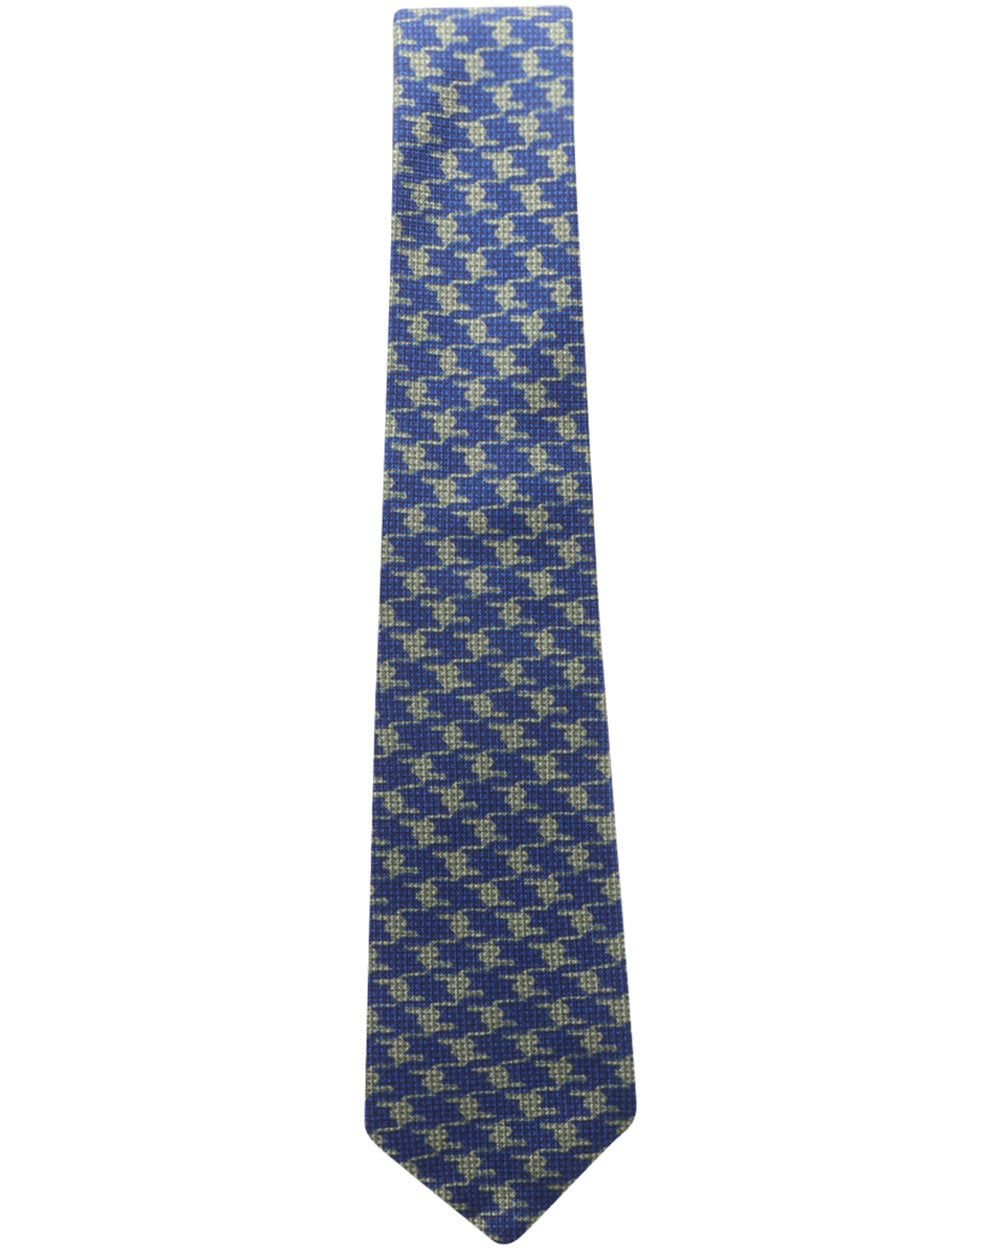 Navy and Olive Exploded Houndstooth Silk Tie